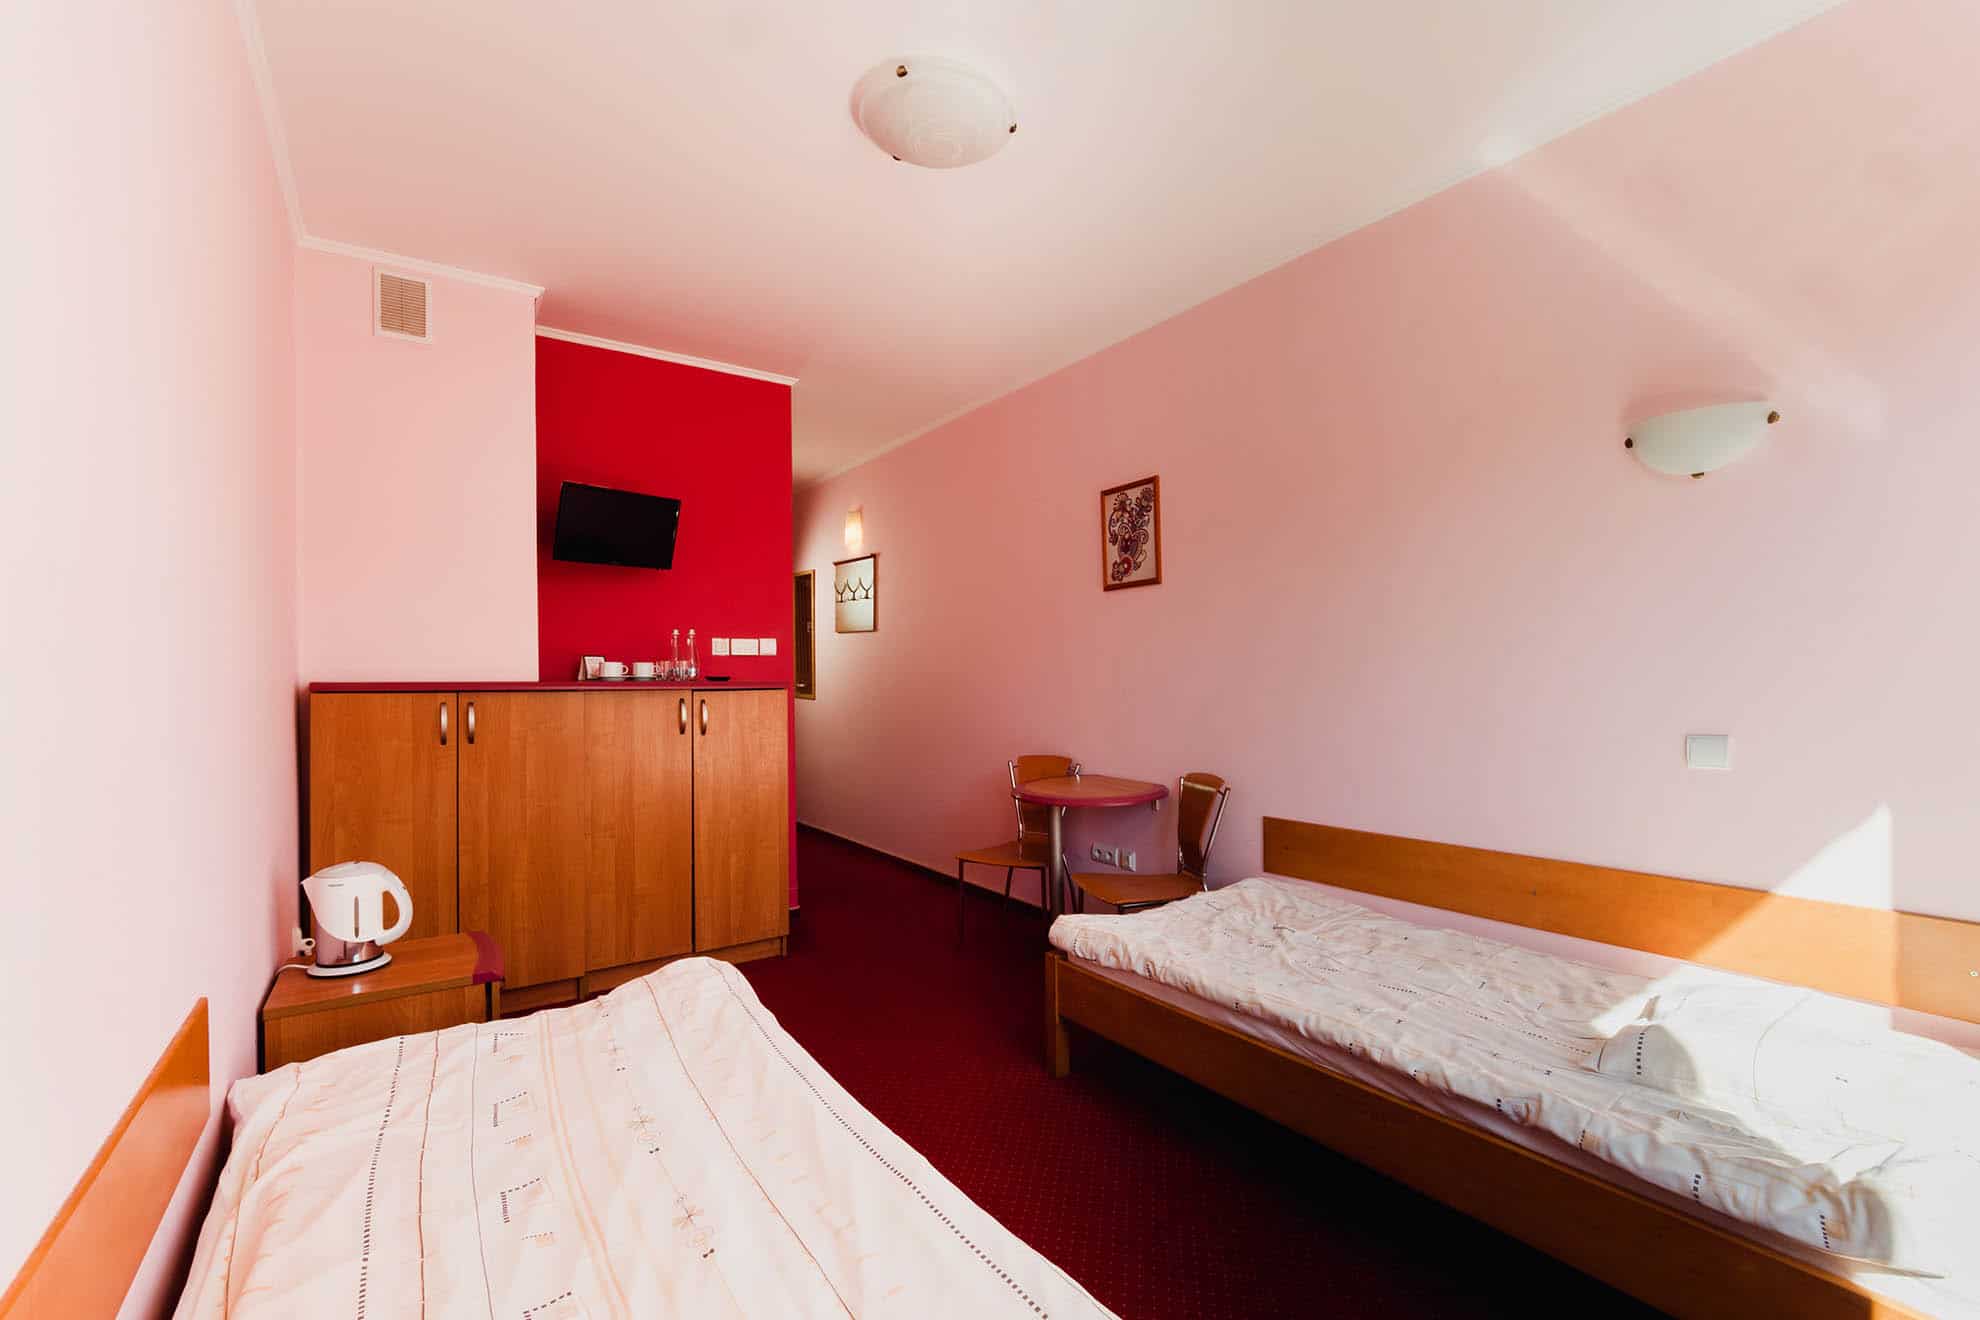 ROOMS Krosno accommodation in the city center, rest in Poland 02